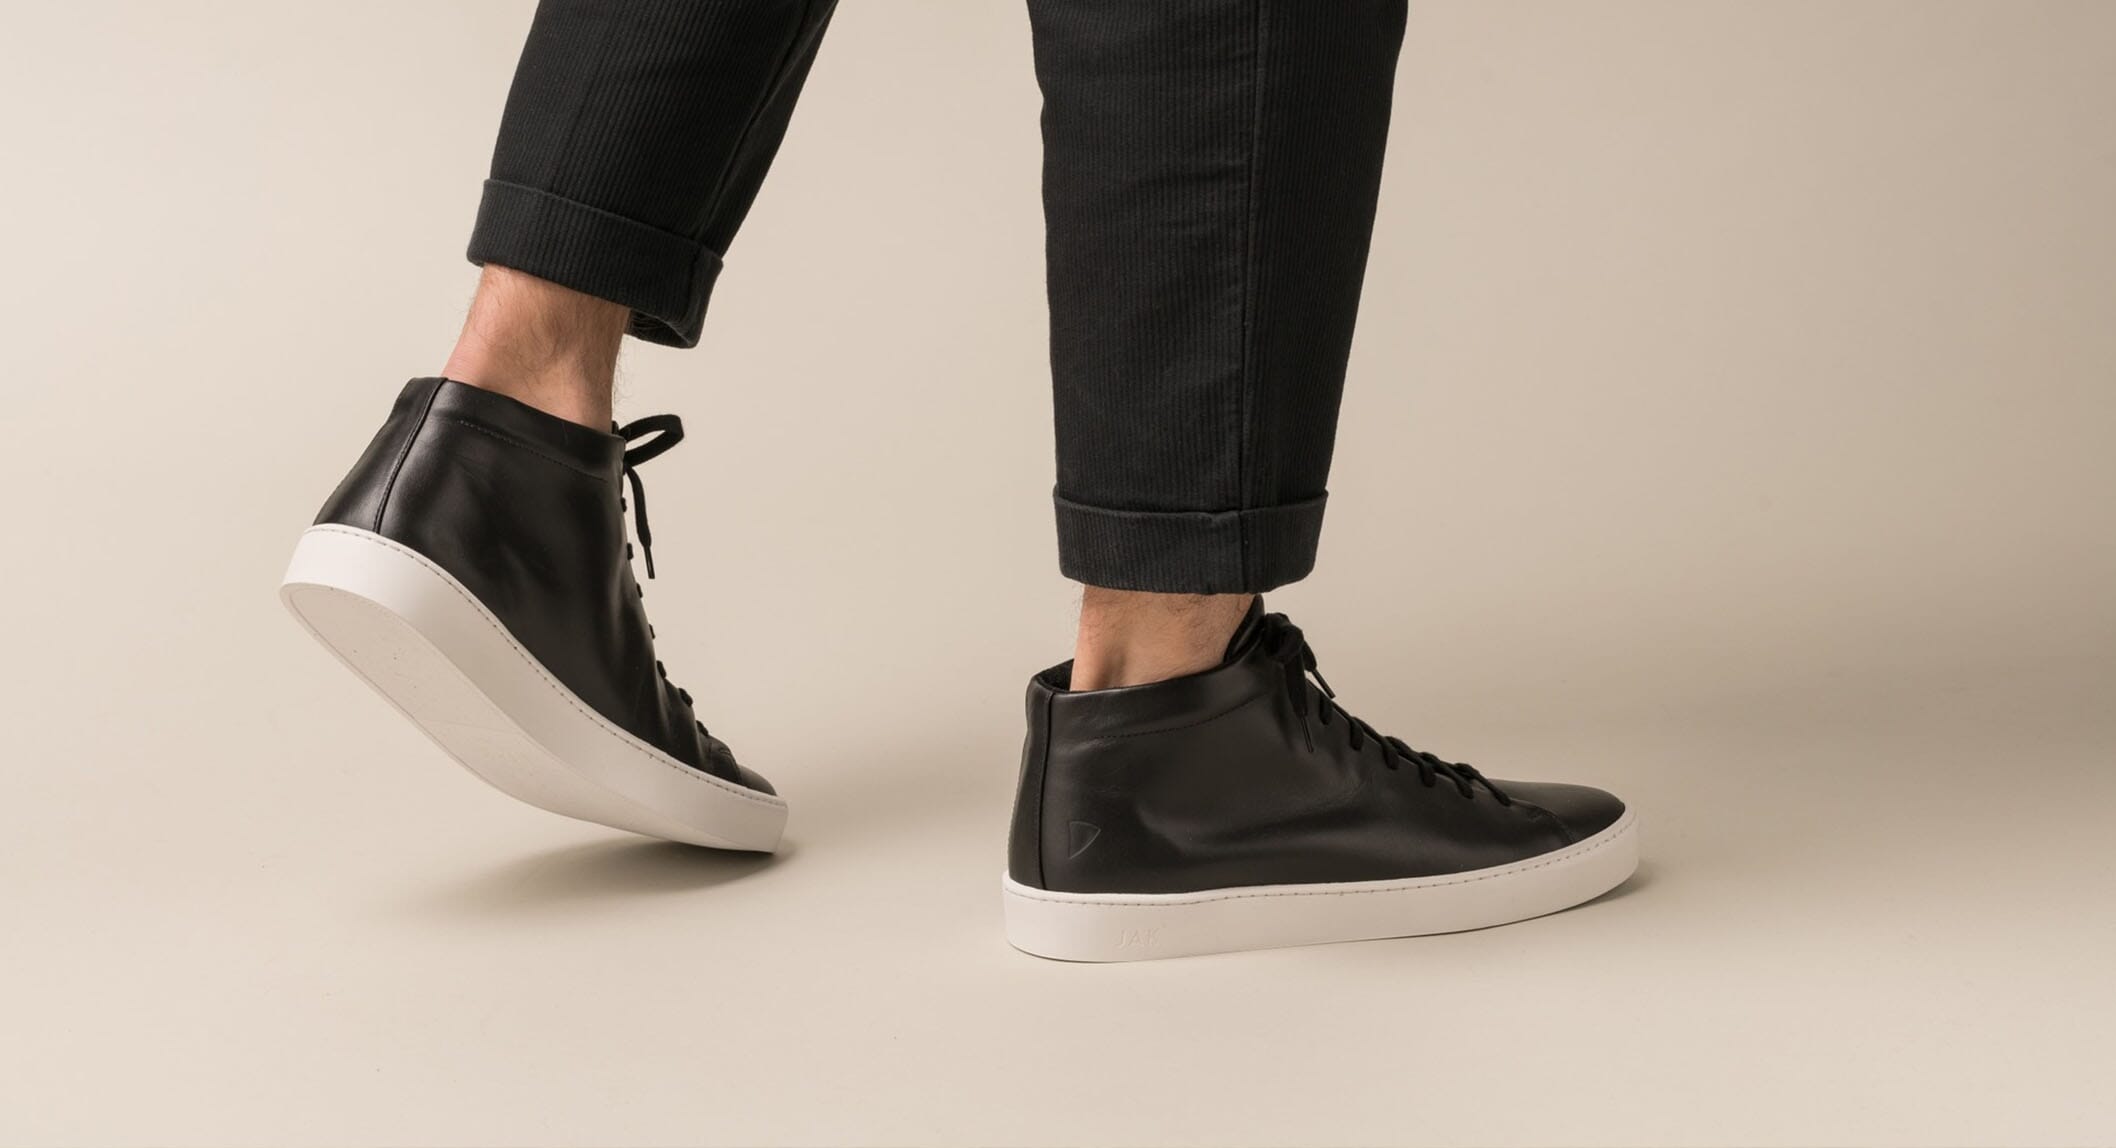 Versatile and Chic: Discover the Best Black Sneakers